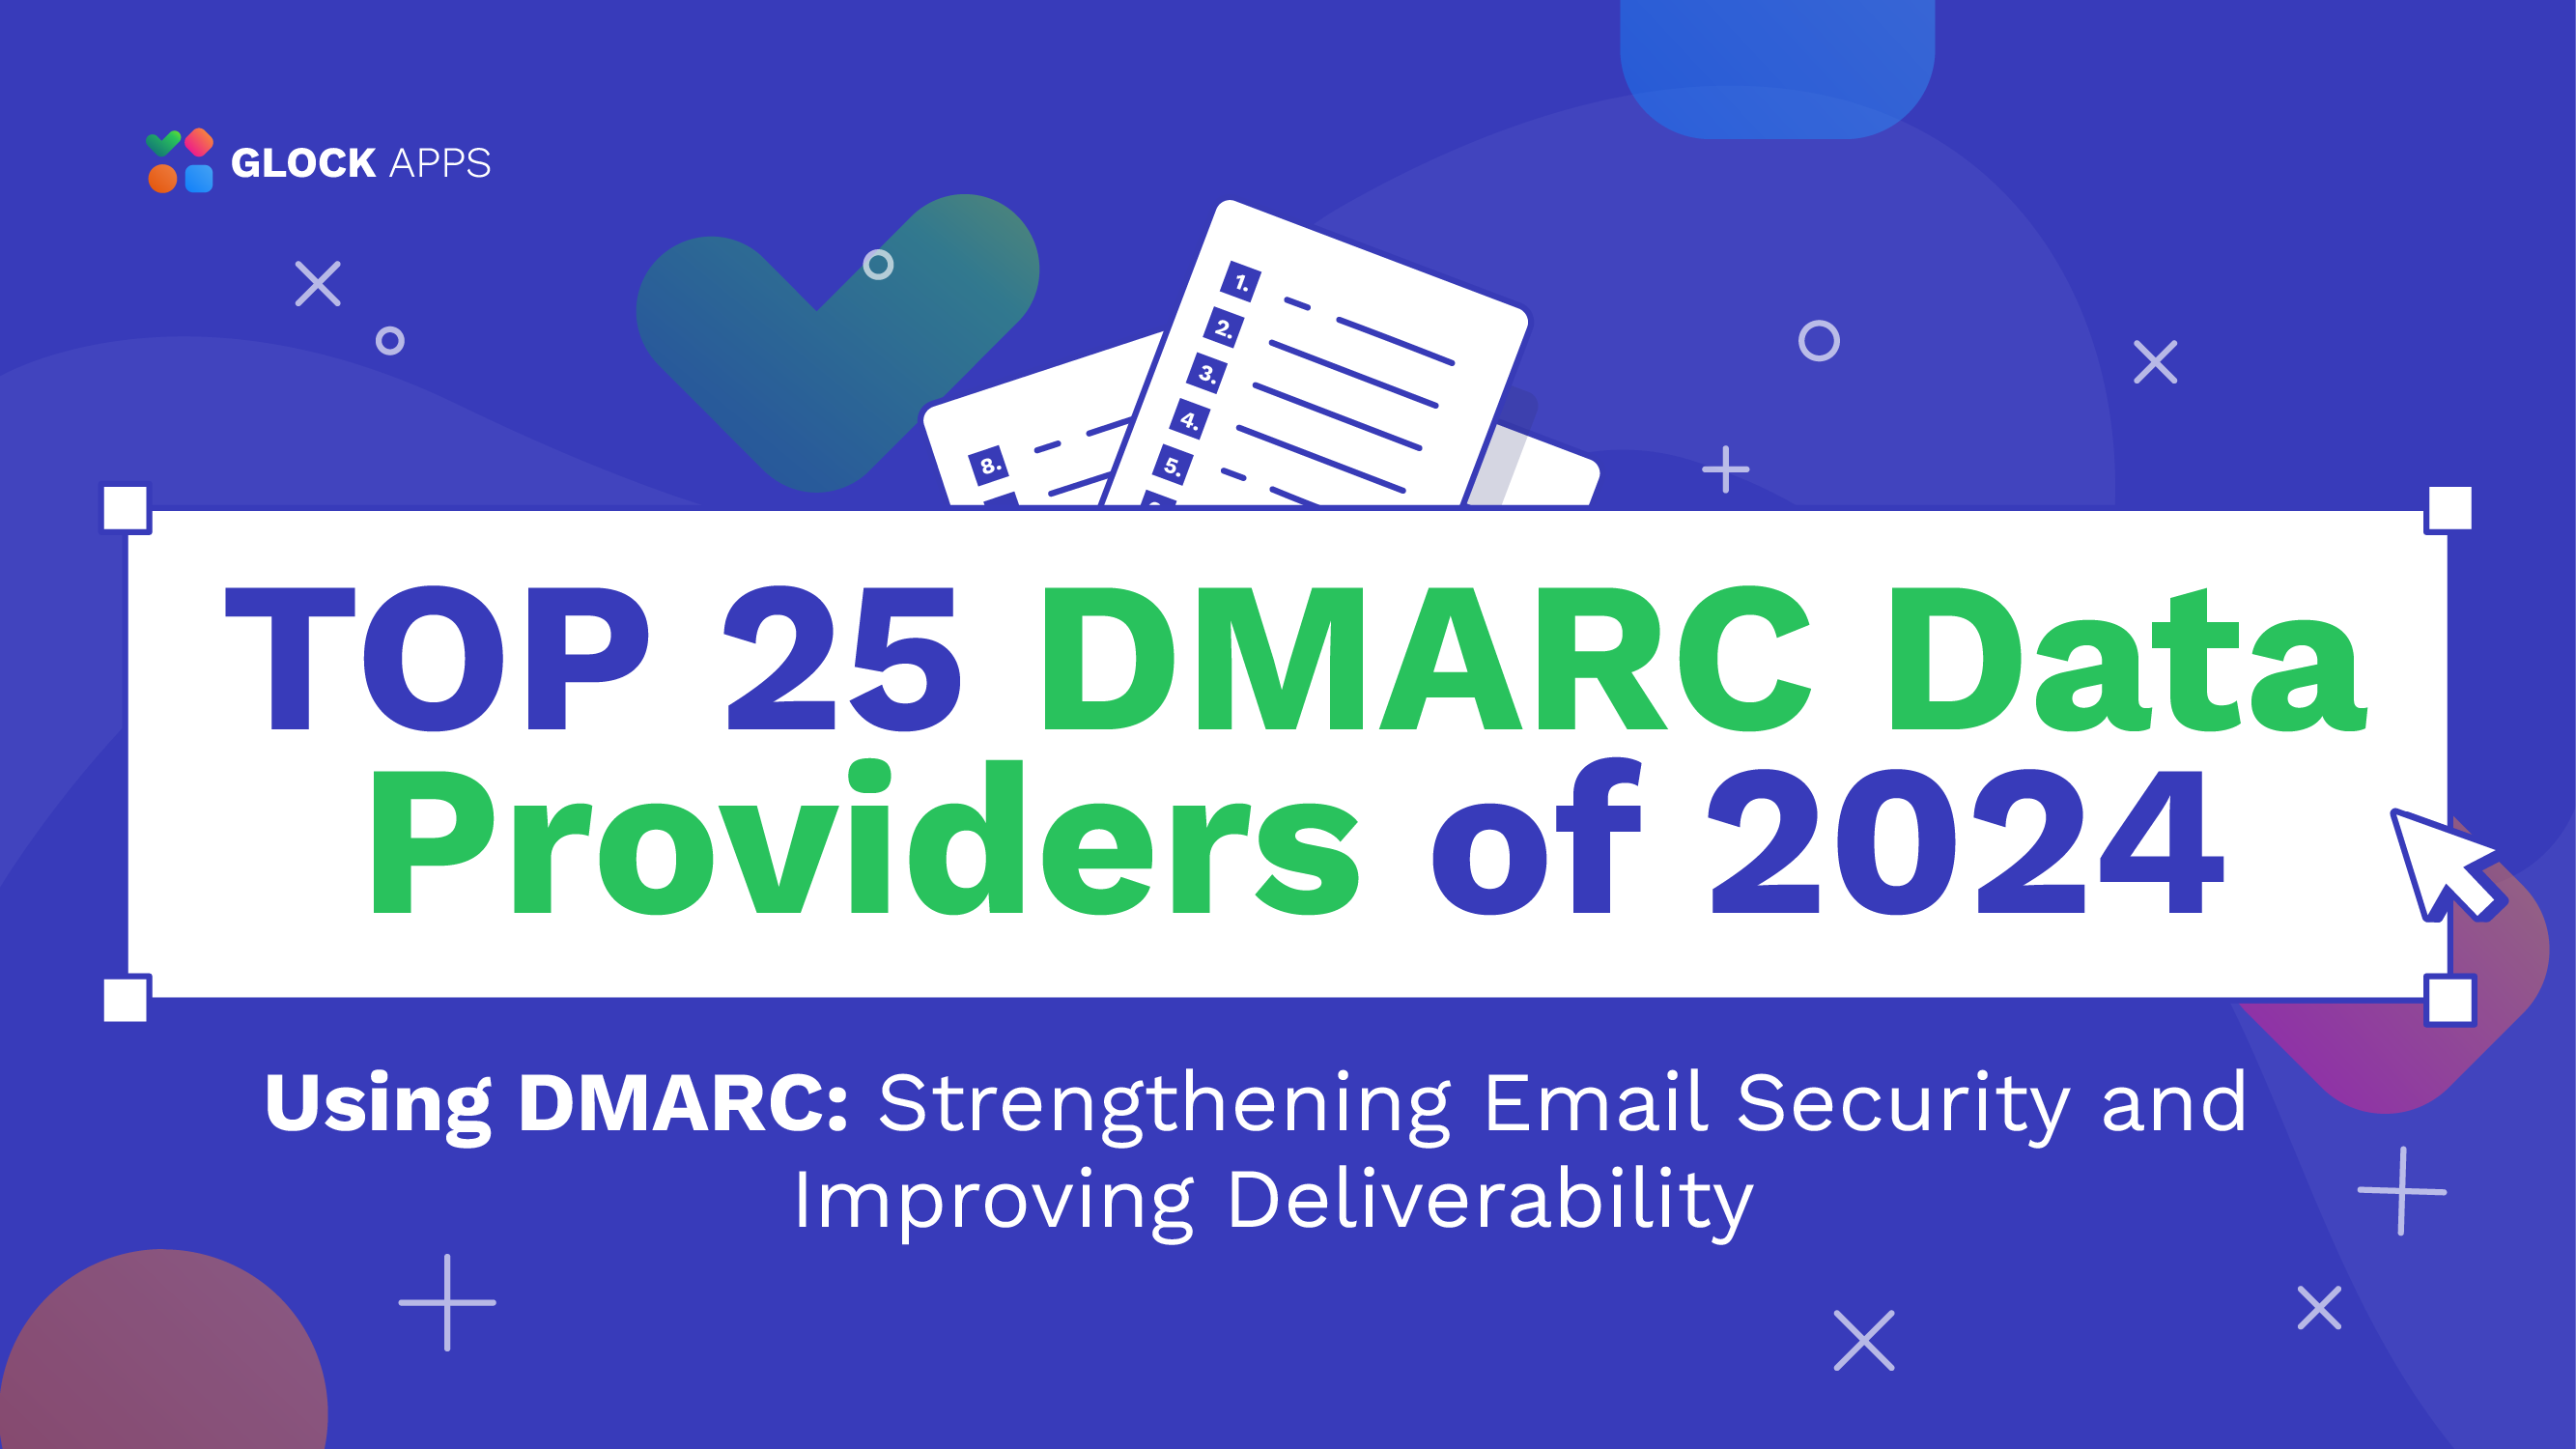 Top 25 DMARC Data Providers of 2024